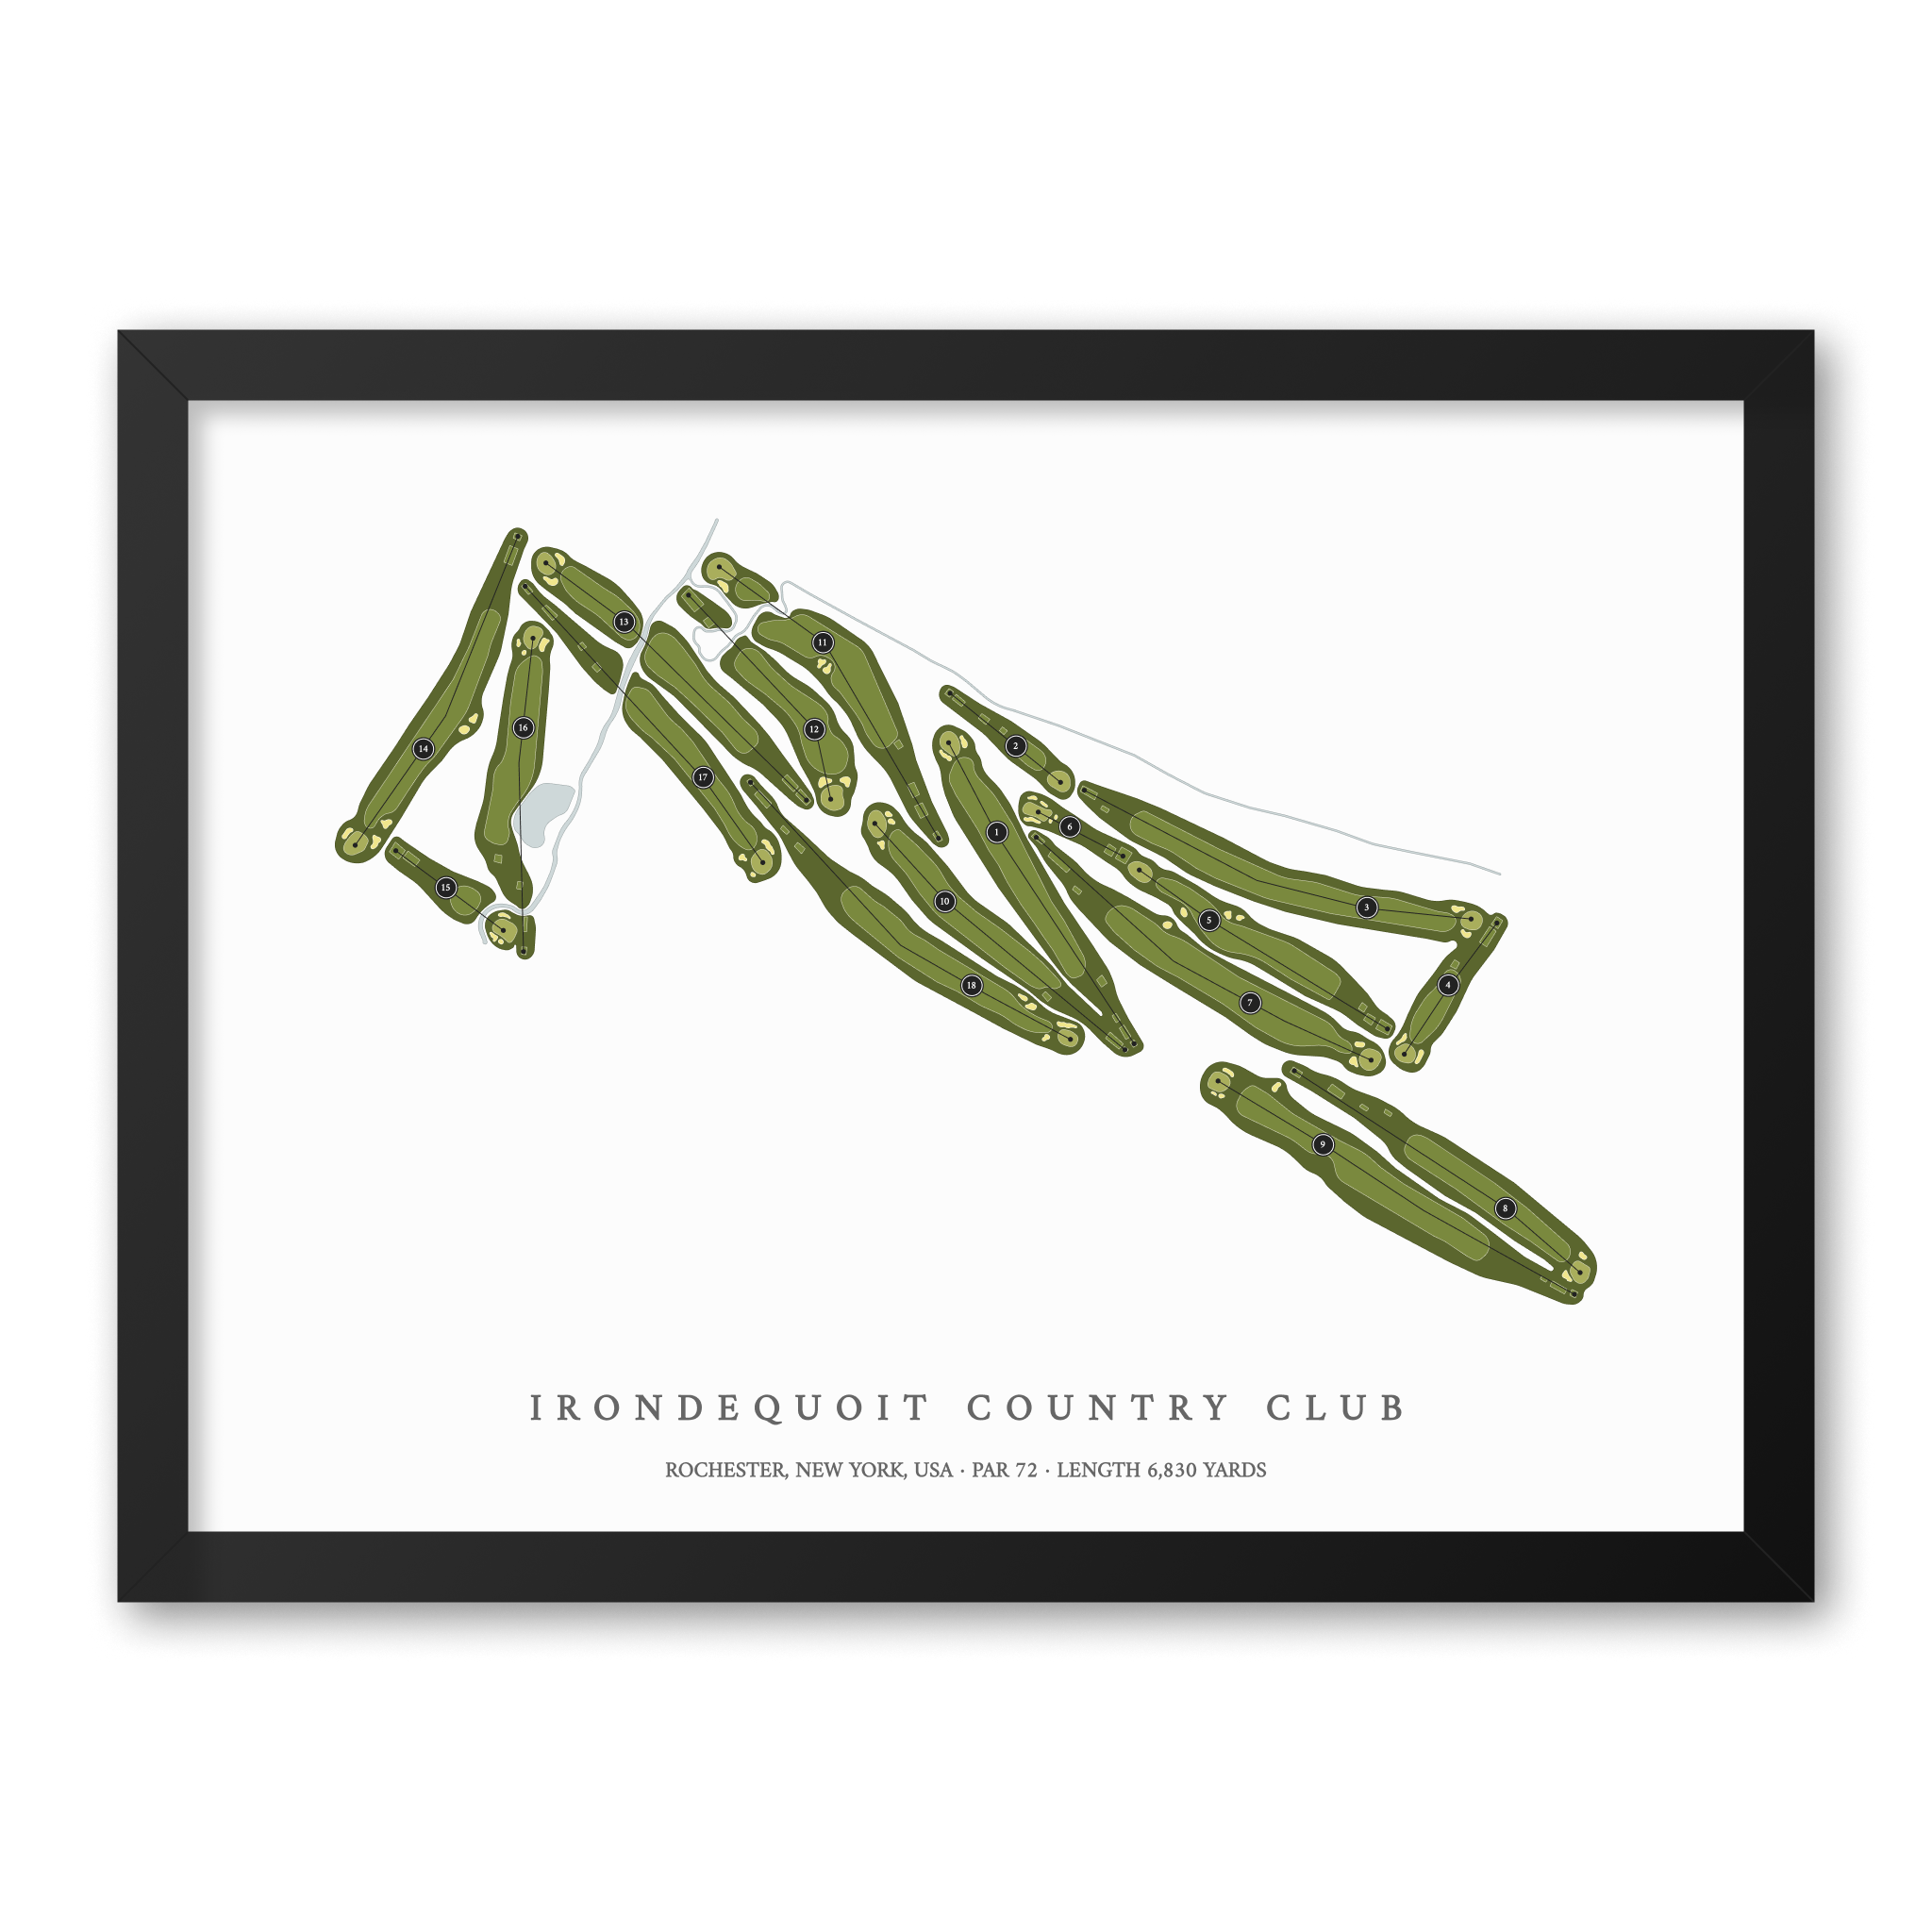 Irondequoit Country Club| Golf Course Print | Black Frame With Hole Numbers #hole numbers_yes